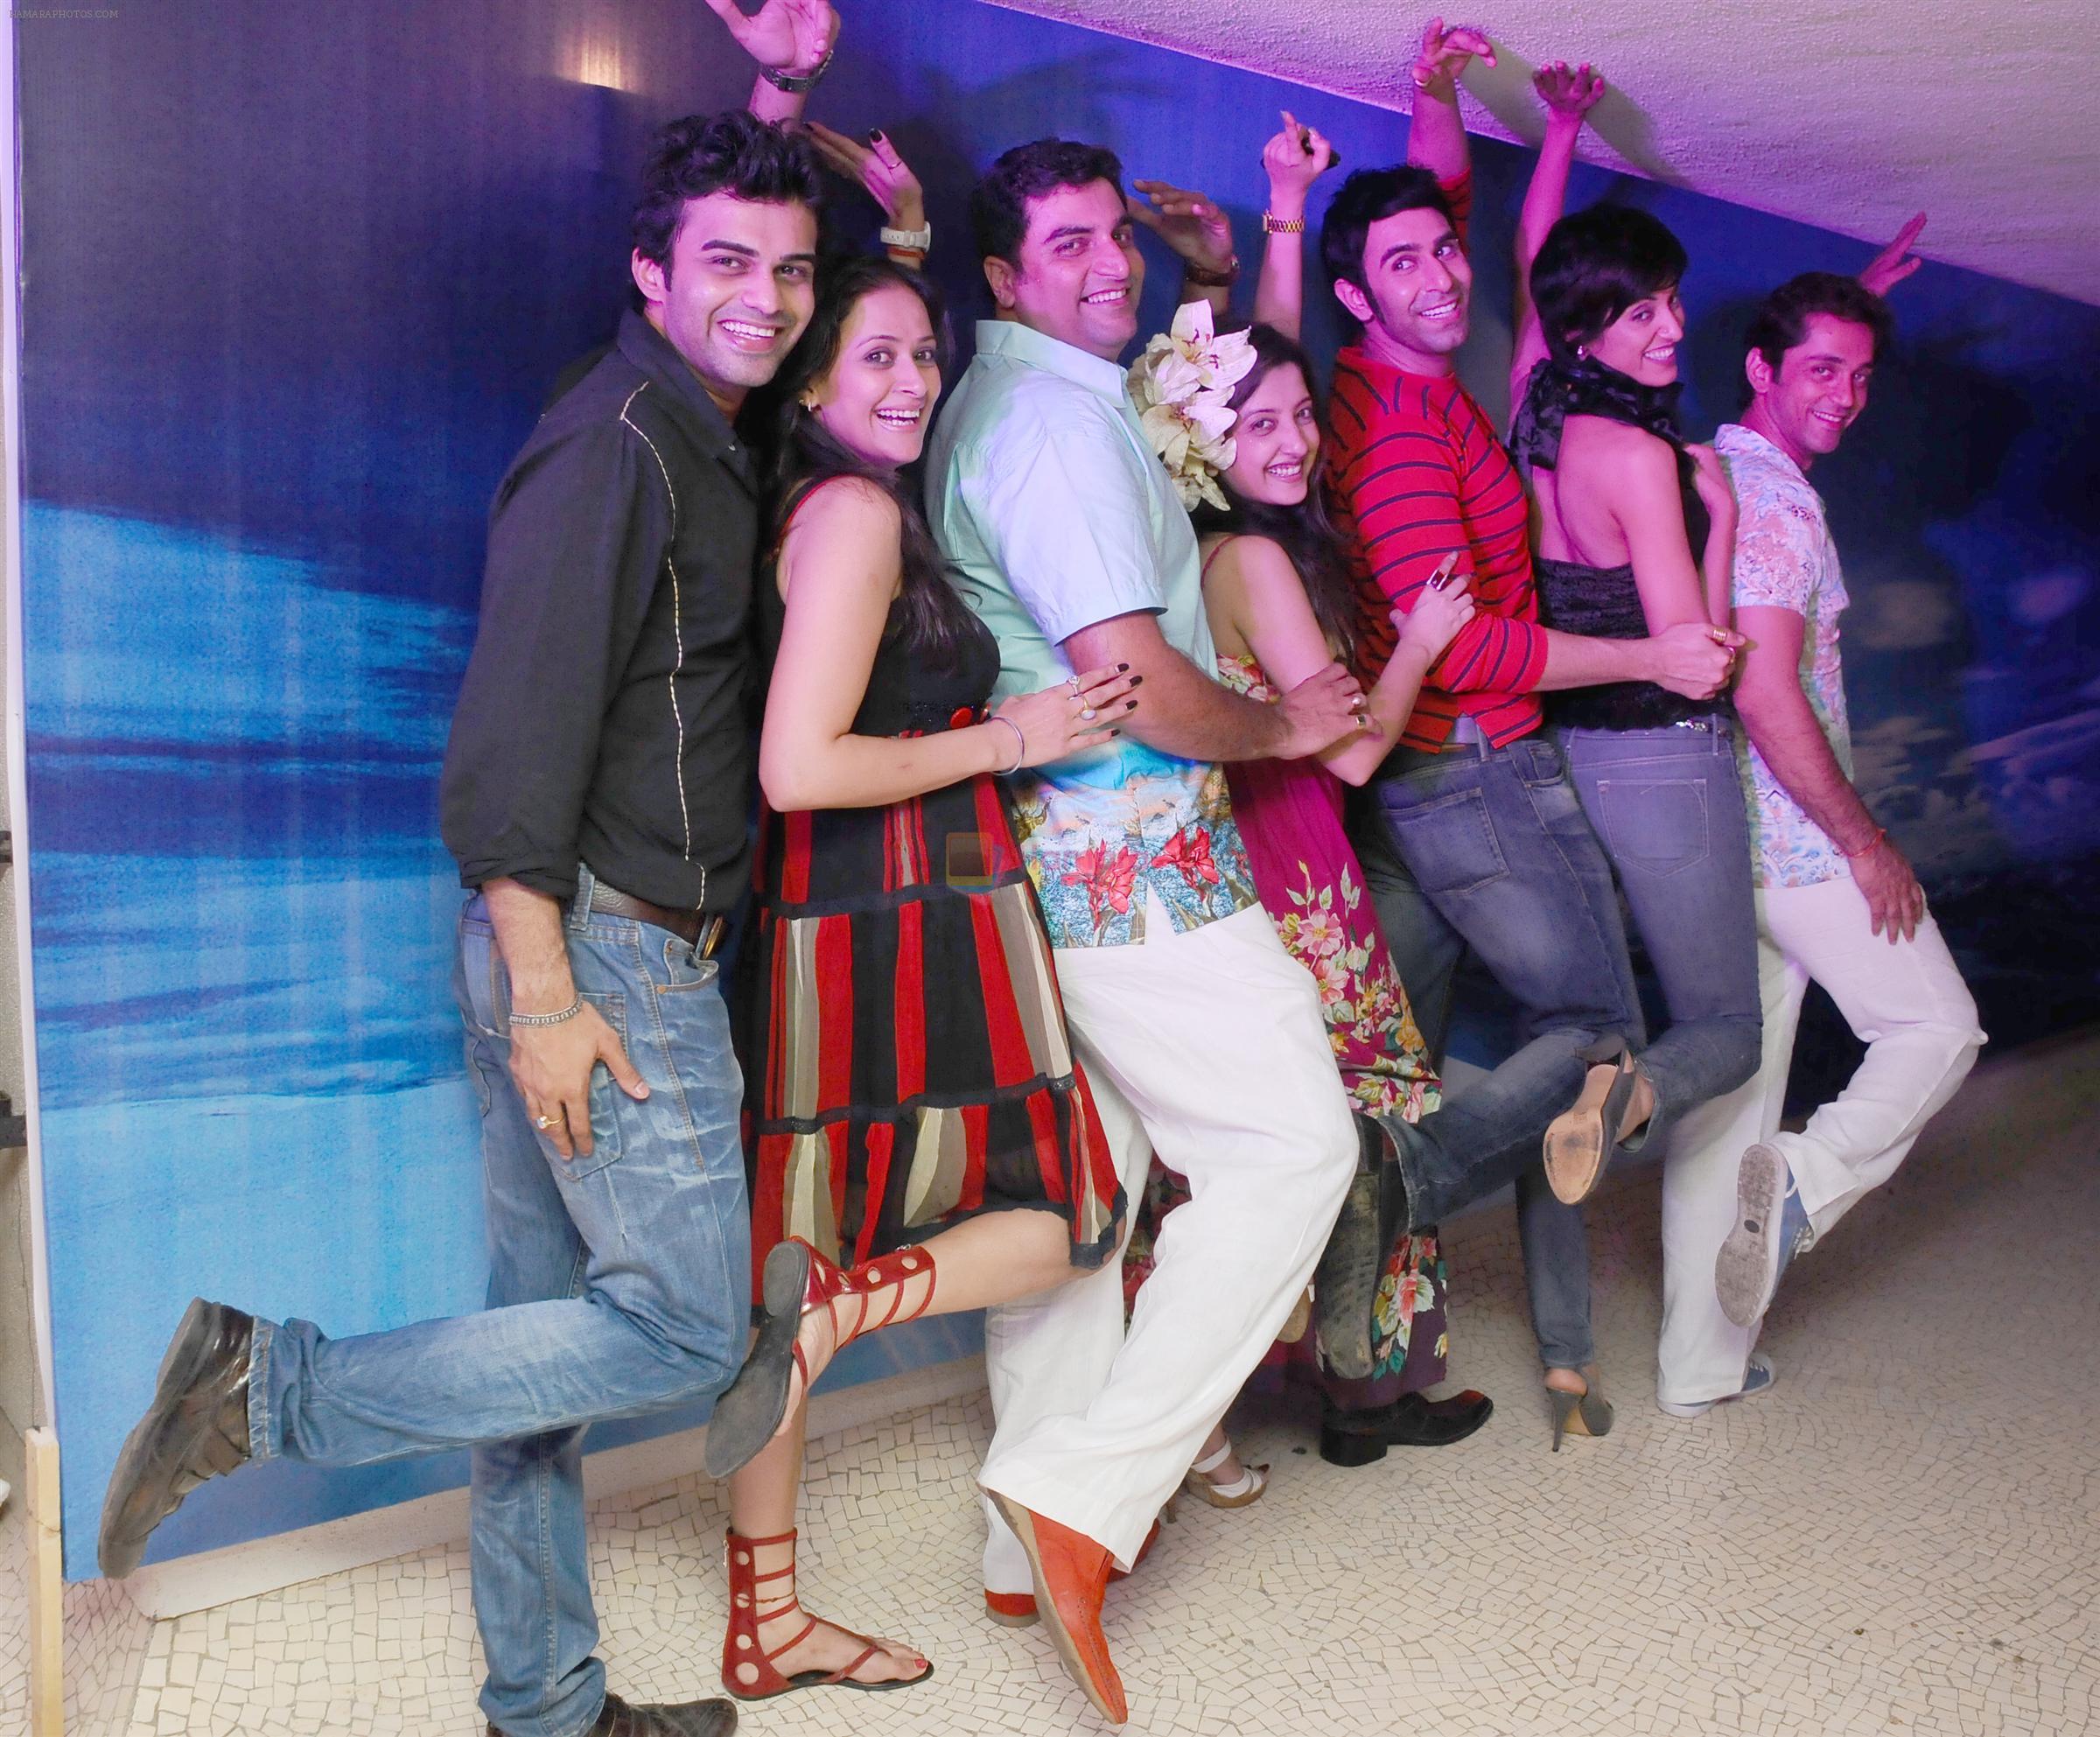 Jasvir Kaur, Farzad and Amy Billimoria , Sandeep Soparkar and Jesse at Naughty at forty Hawain surprise birthday party by Amy Billimoria on 12th March 2012